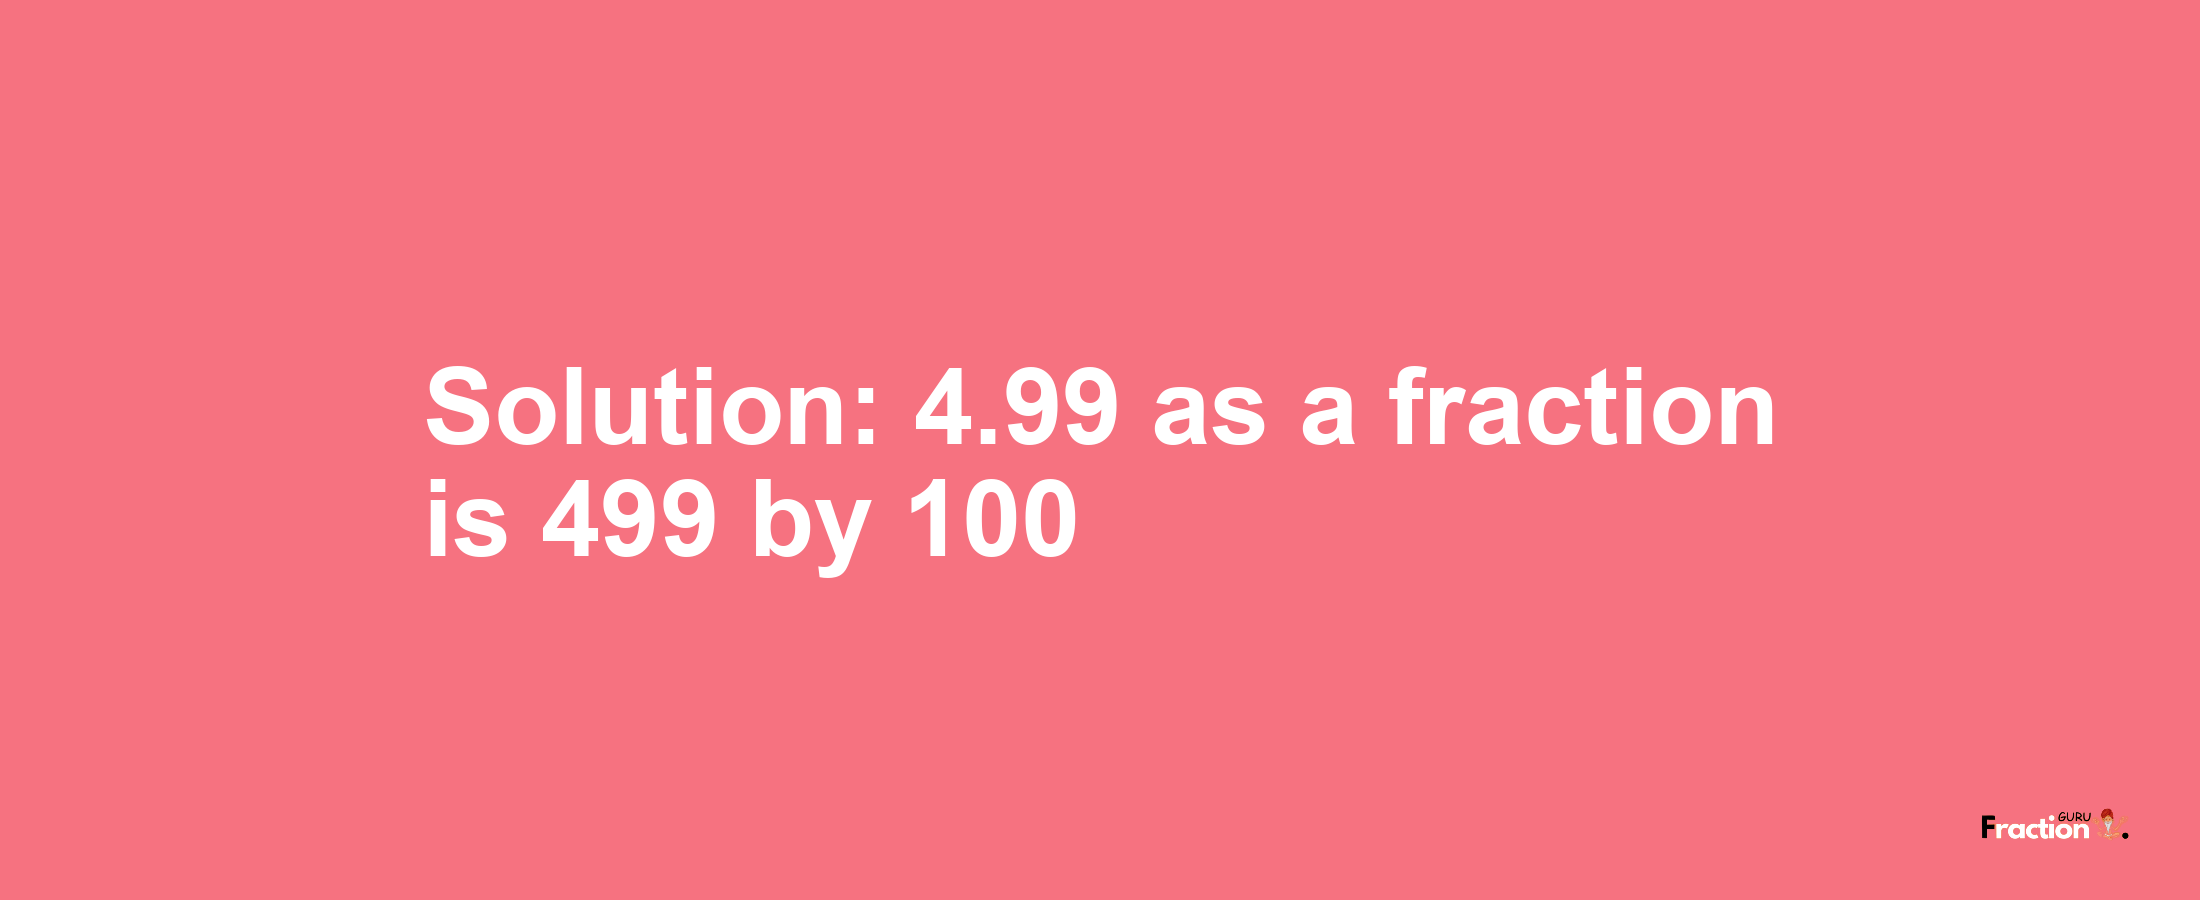 Solution:4.99 as a fraction is 499/100